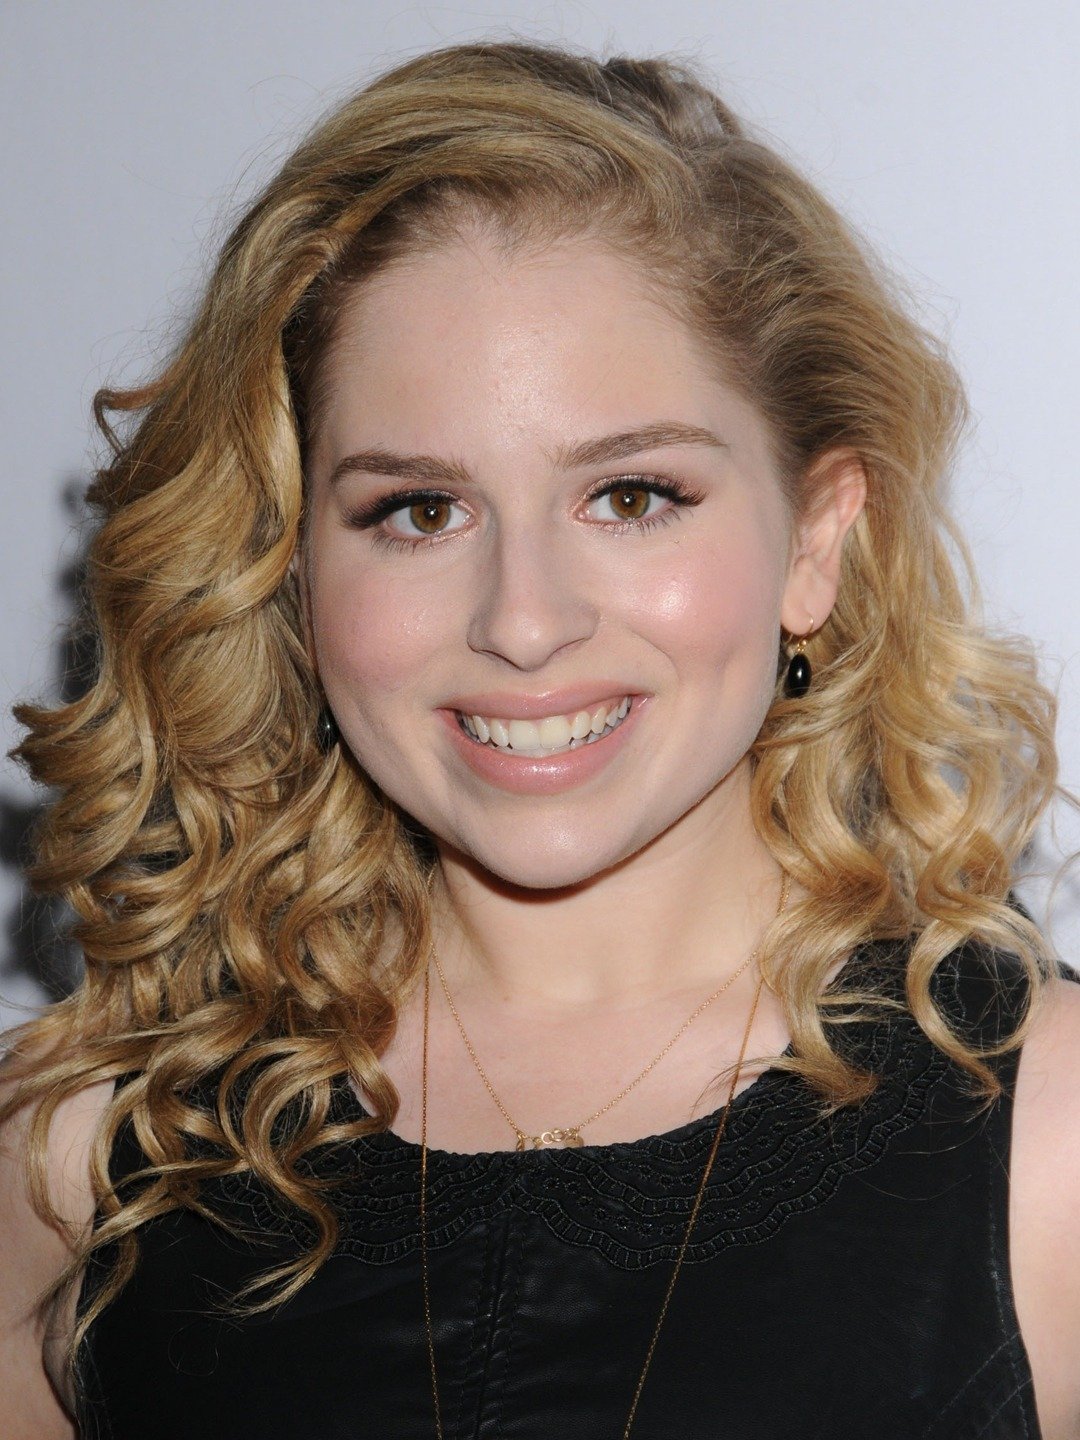 How tall is Allie Grant?